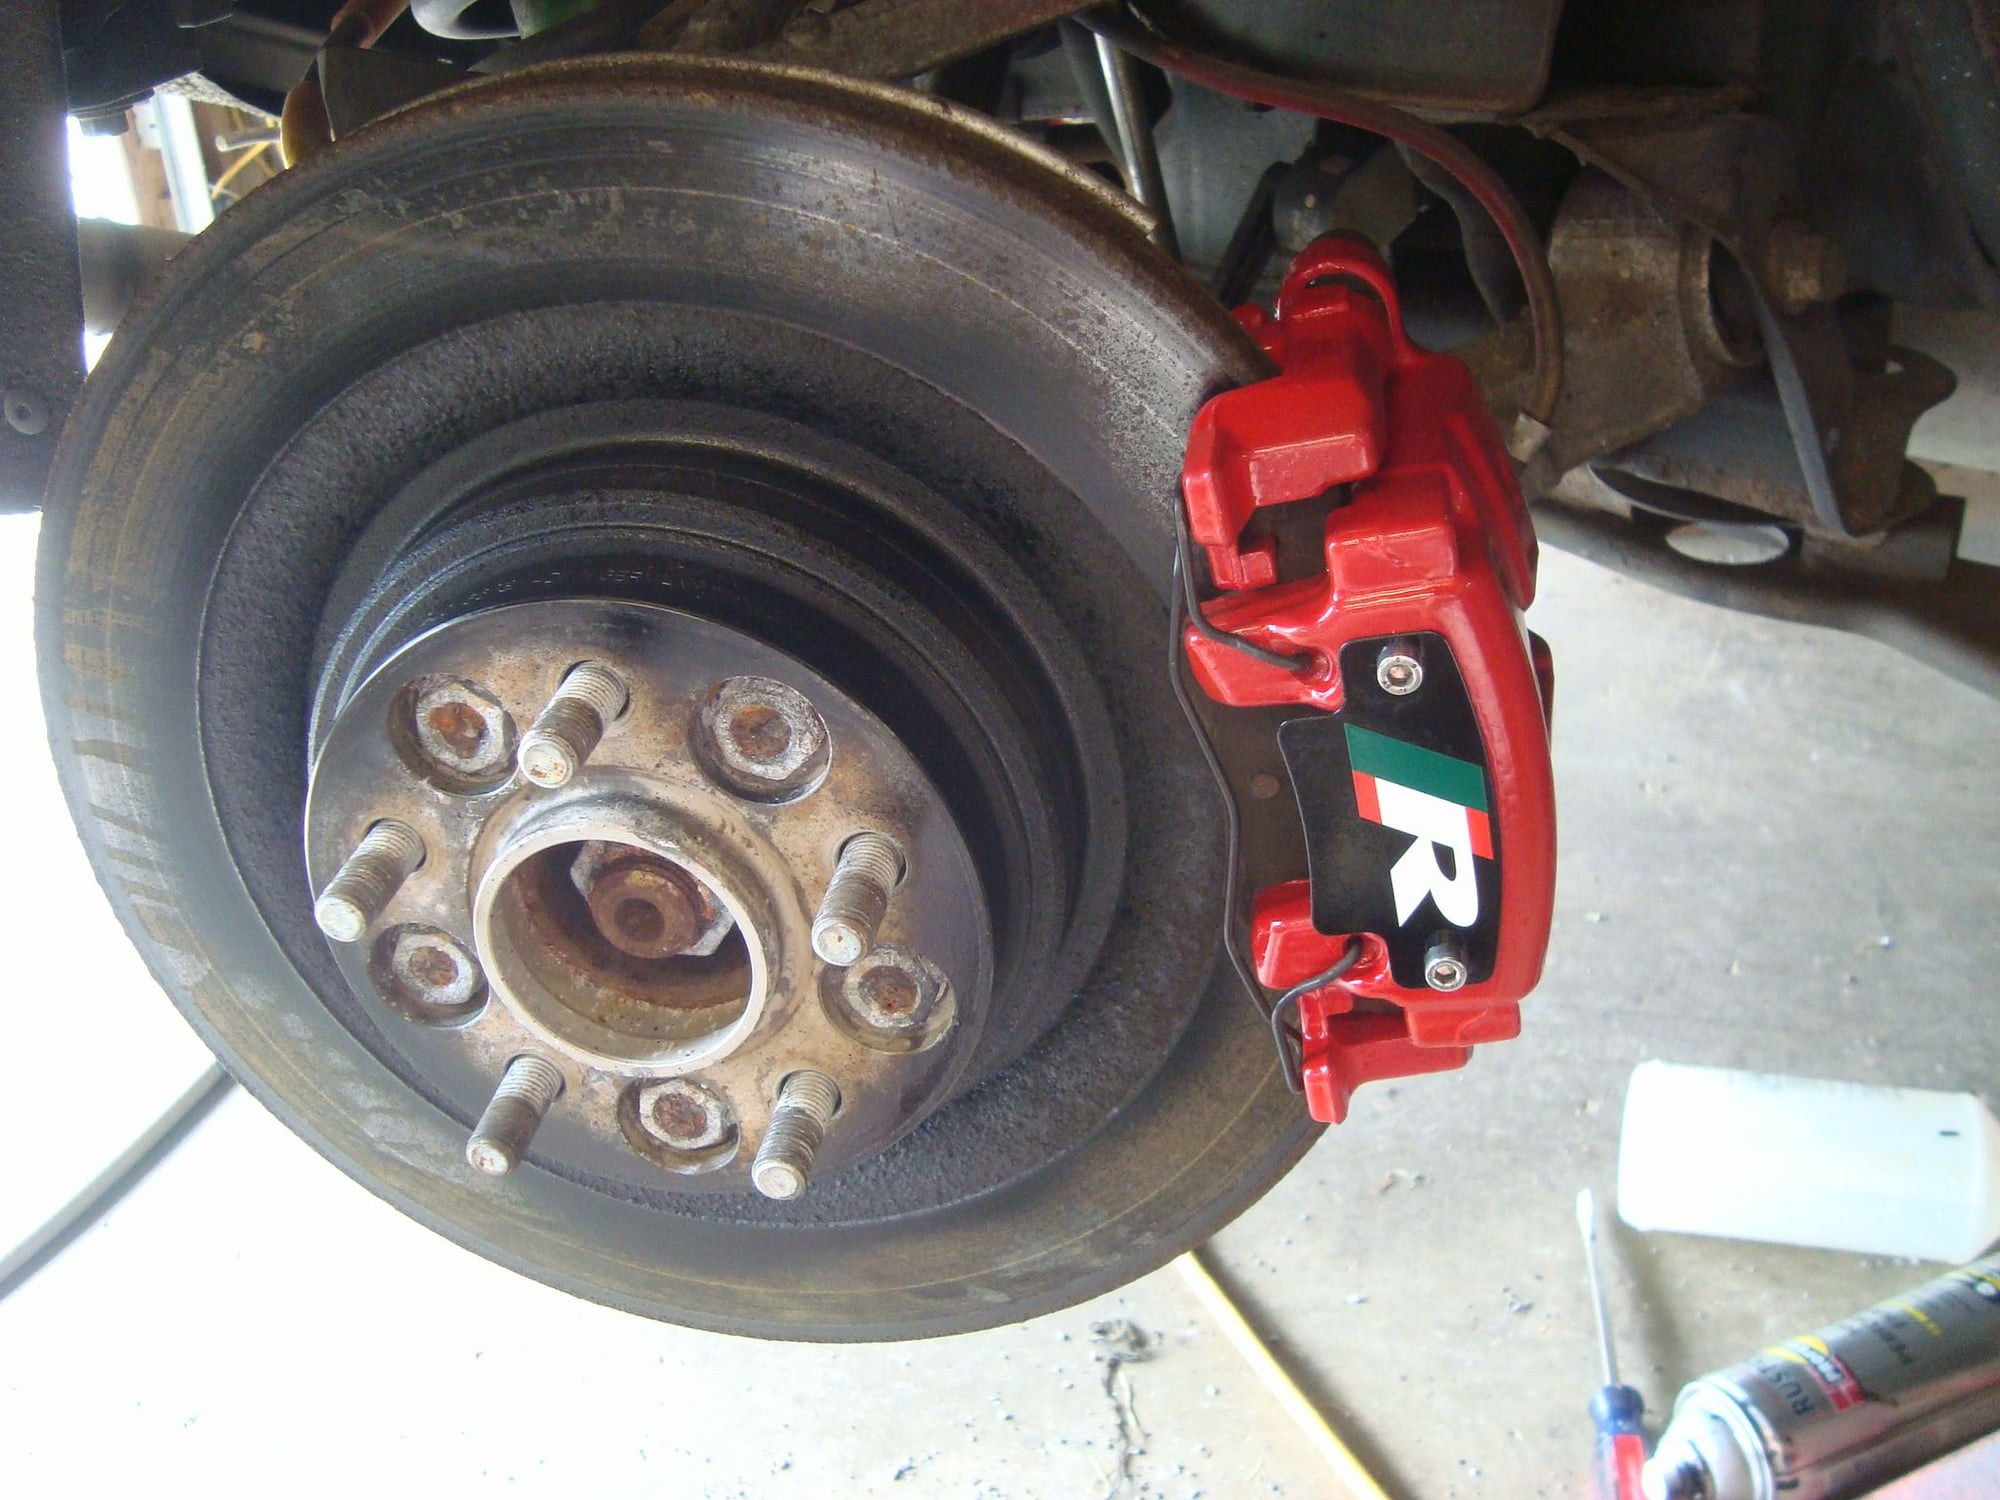 Split [hole] in my rubber boots + tire patch kit : r/redneckengineering